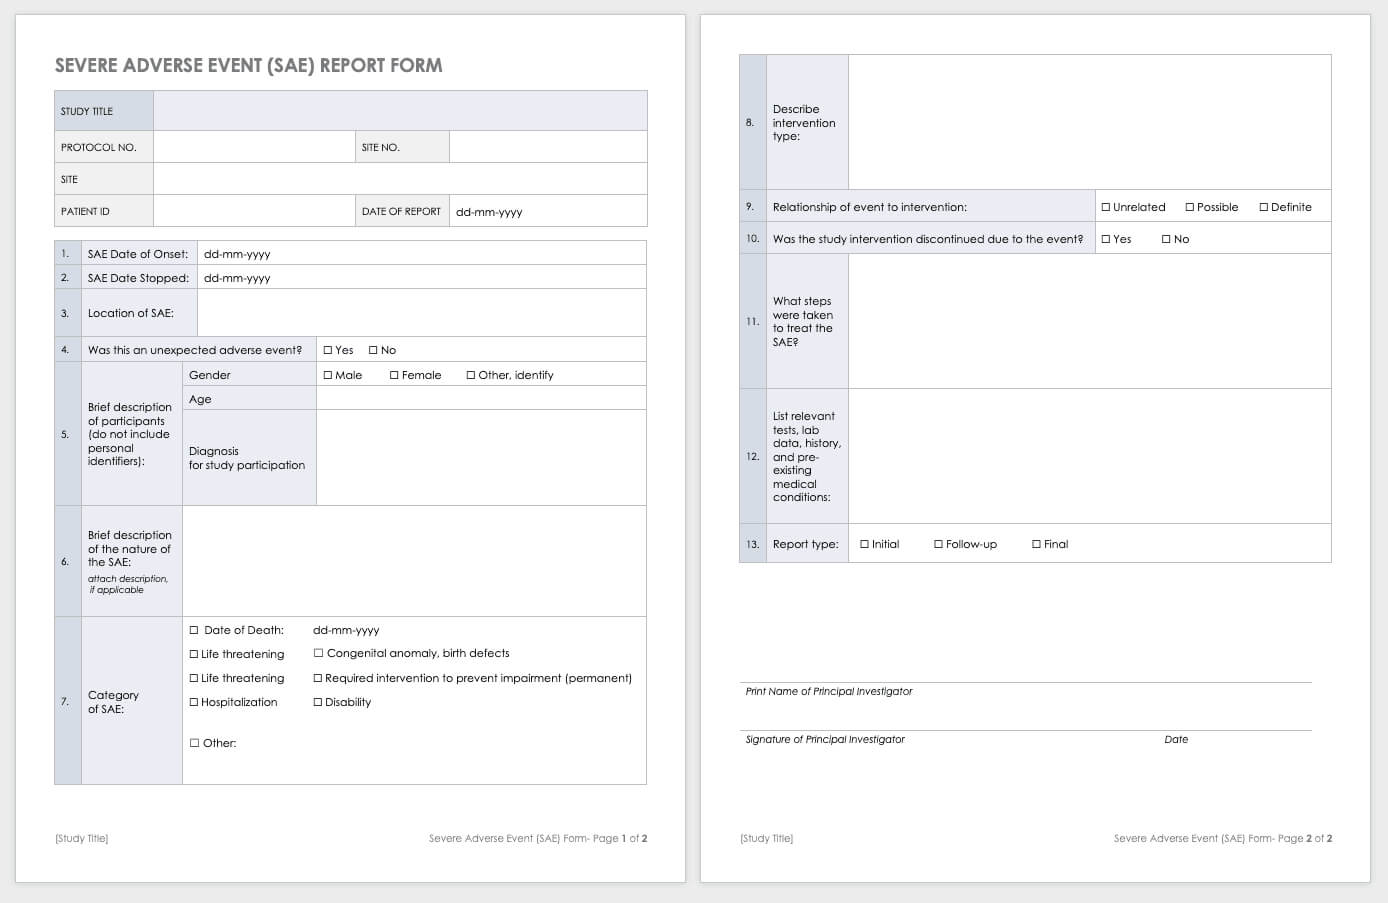 Free Clinical Trial Templates | Smartsheet Pertaining To Clinical Trial Report Template